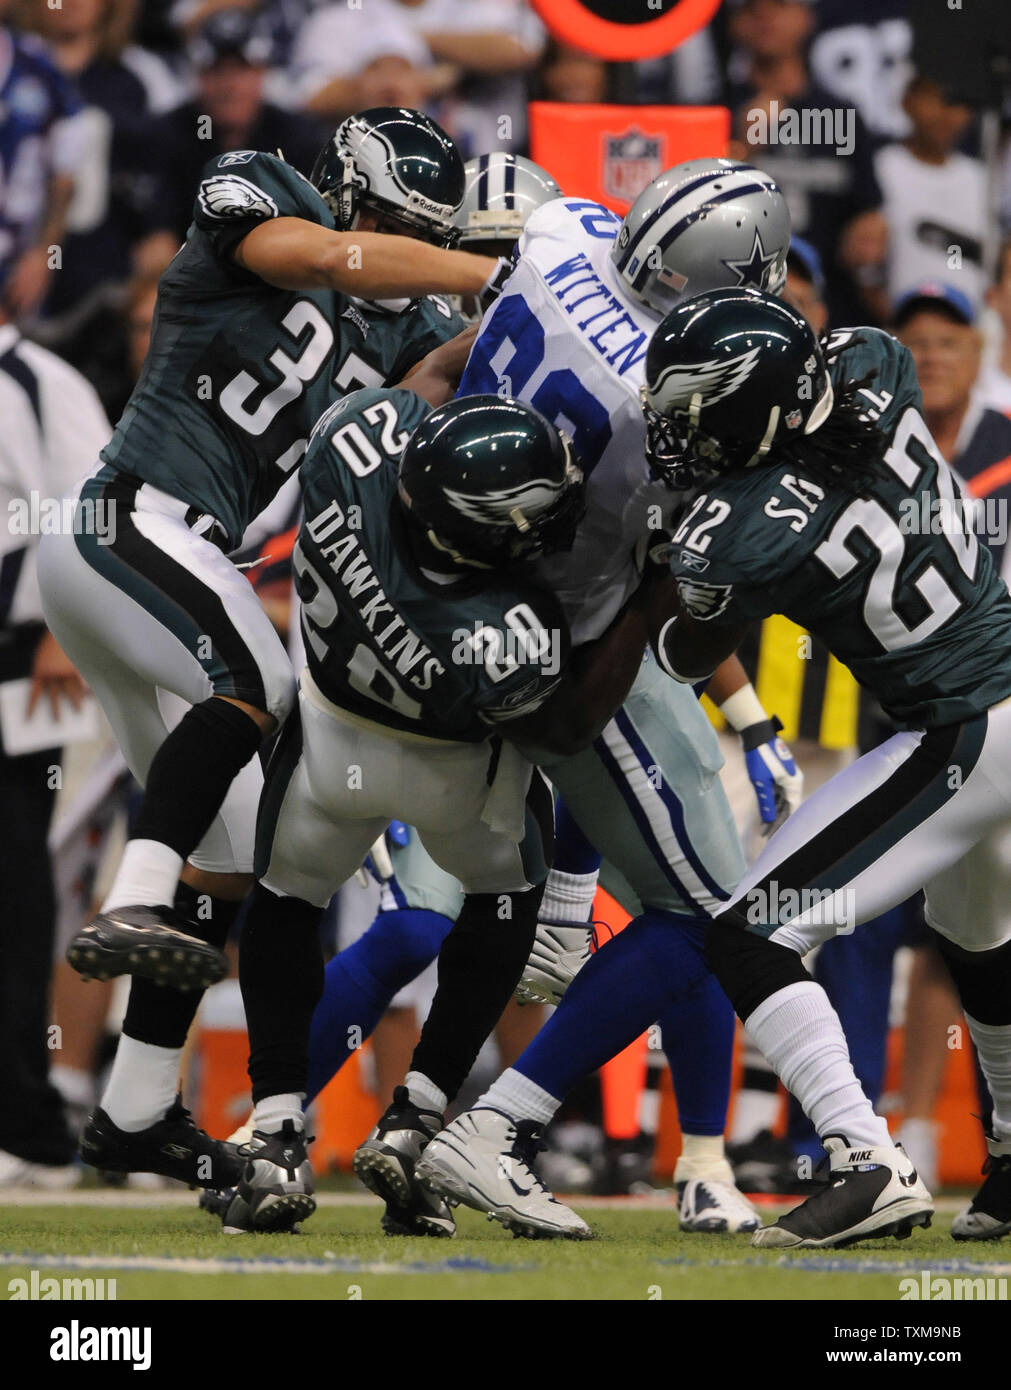 Dallas Cowboys wide reciever Jason Whitten gets wrapped up by Philadelphia Eagles Sean Considine (37), Brian Dawkins (20) and Asante Samuel (20) during the first half during the first half September 15, 2008 at Texas Stadium in Irving, Texas.  The Cowboys beat the Eagles 41-37.  (UPI Photo/Ian Halperin) Stock Photo